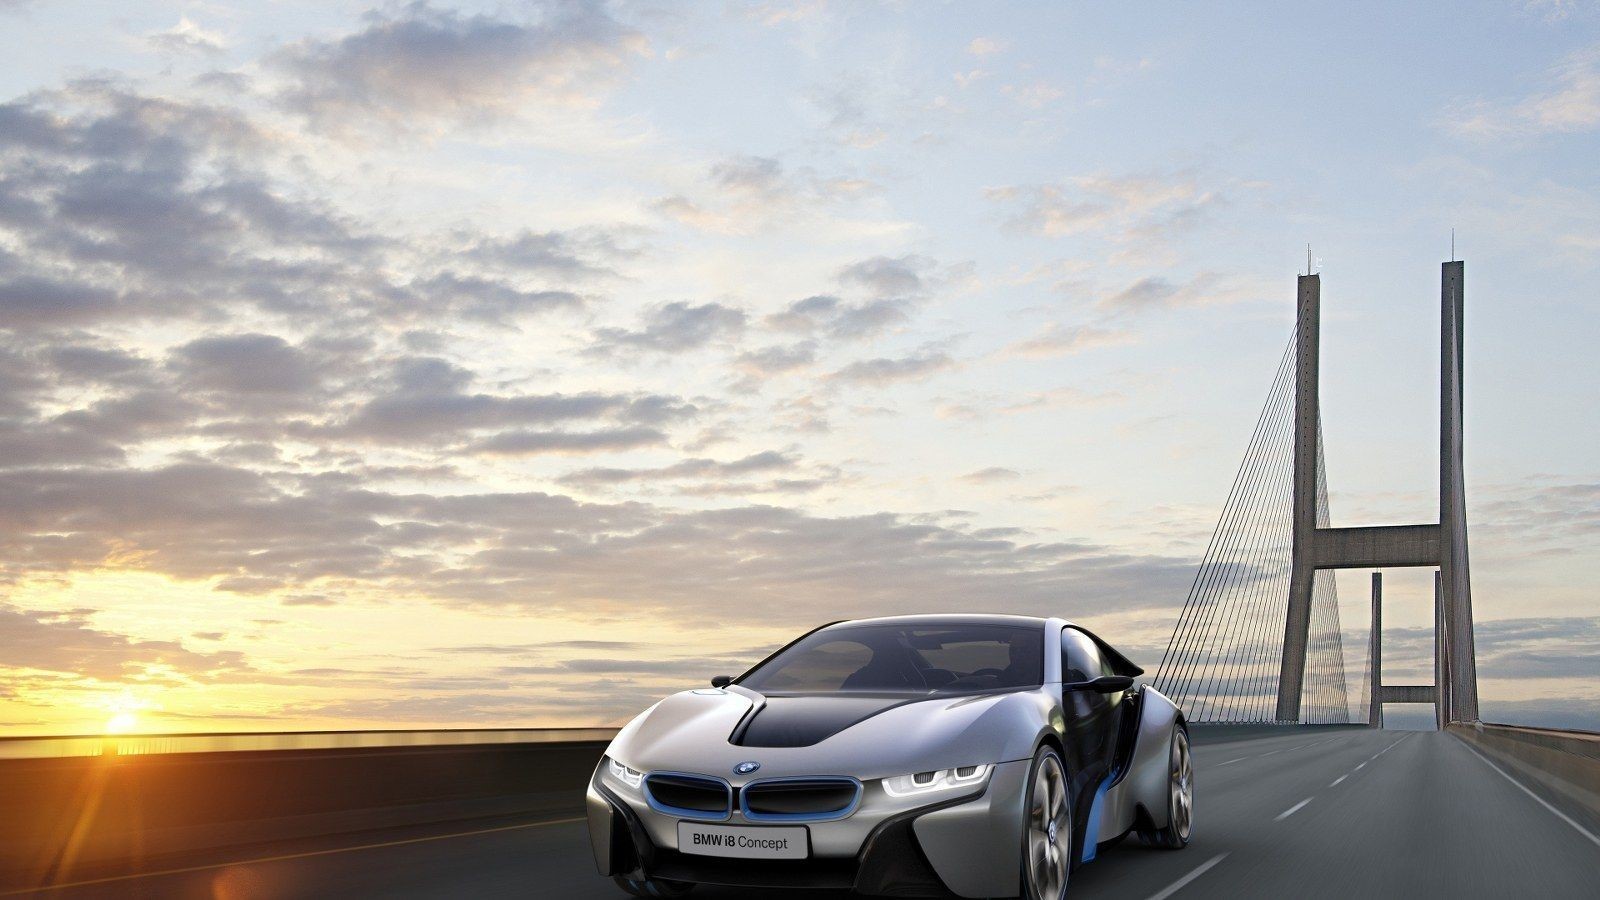 Future Cars Wallpapers Wallpaper Download - High ...